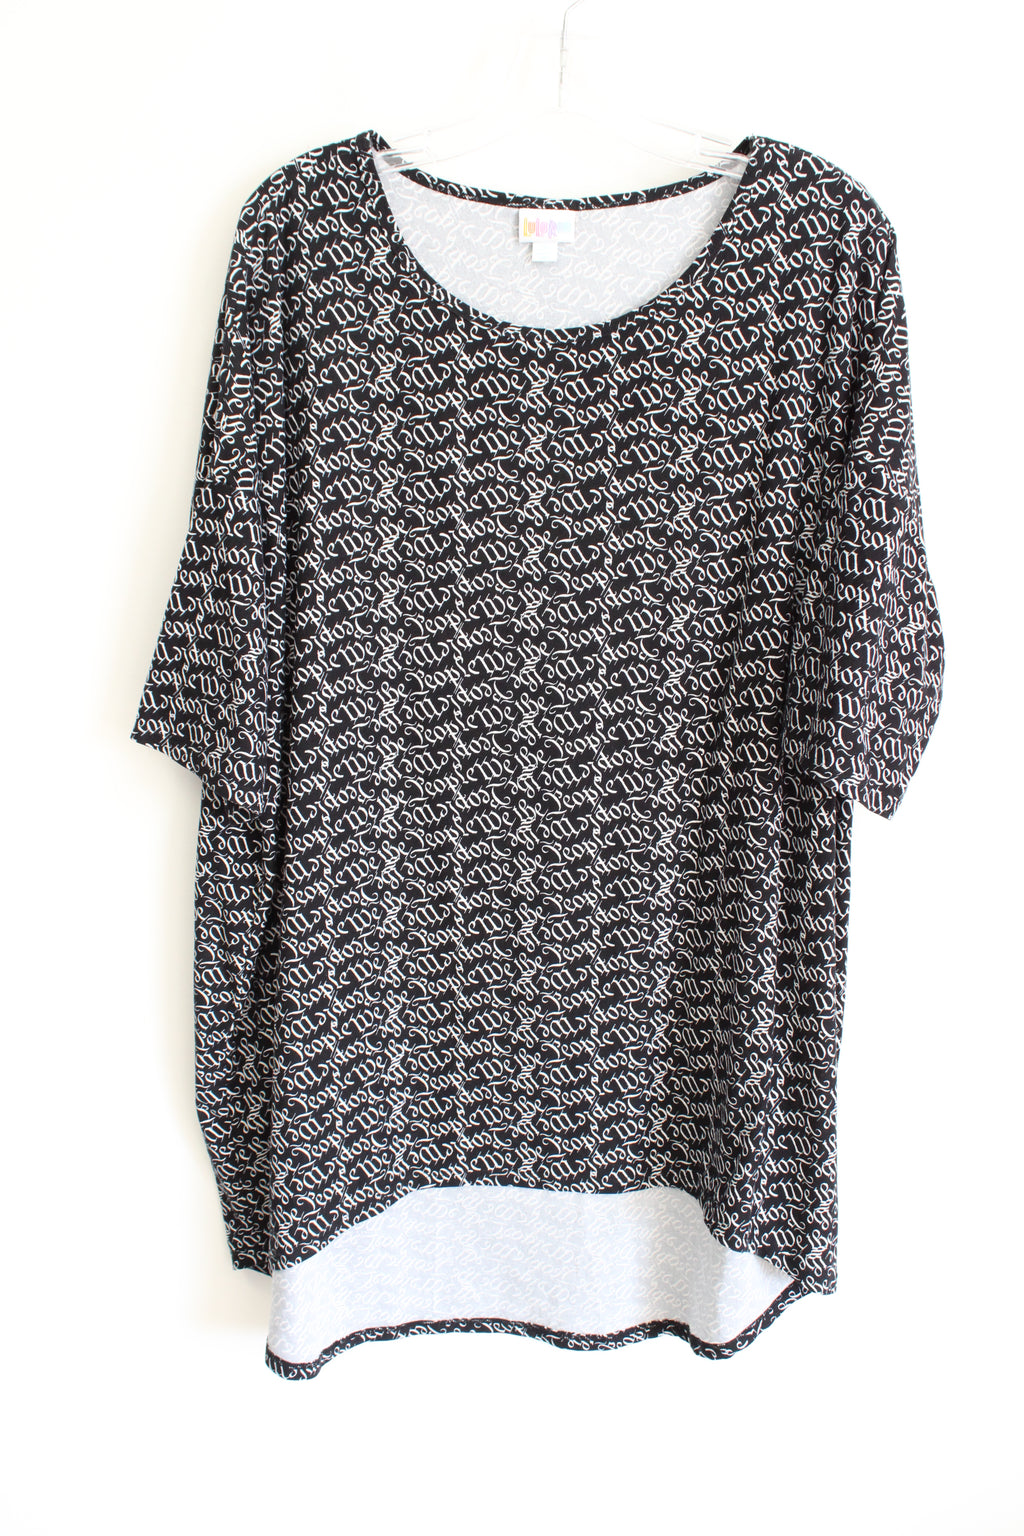 LuLaRoe We The People Black & White Lettered Tunic Top | 2XL